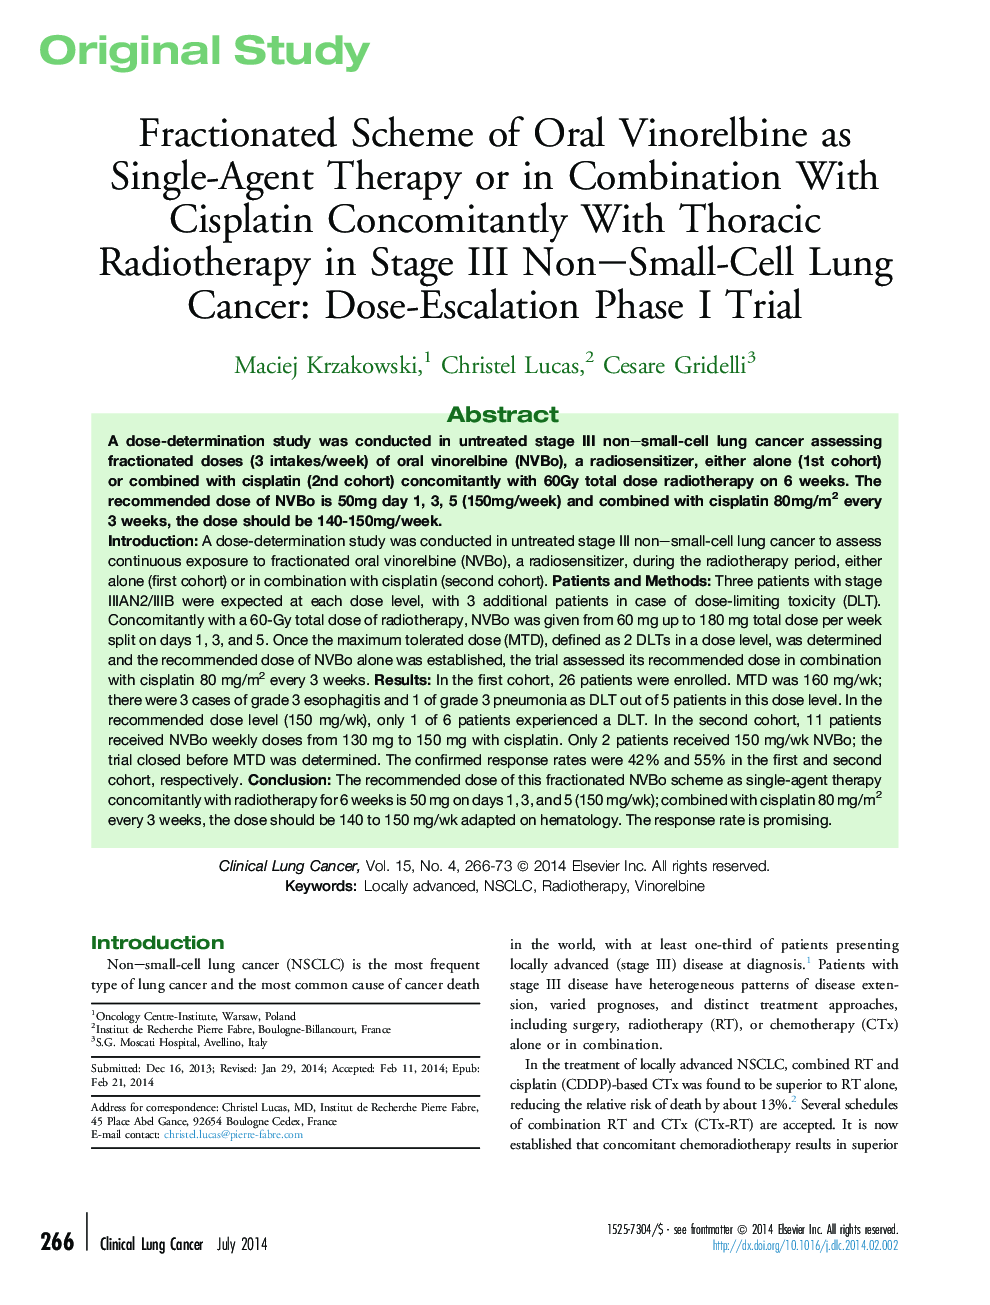 Fractionated Scheme of Oral Vinorelbine as Single-Agent Therapy or in Combination With Cisplatin Concomitantly With Thoracic Radiotherapy in Stage III Non–Small-Cell Lung Cancer: Dose-Escalation Phase I Trial